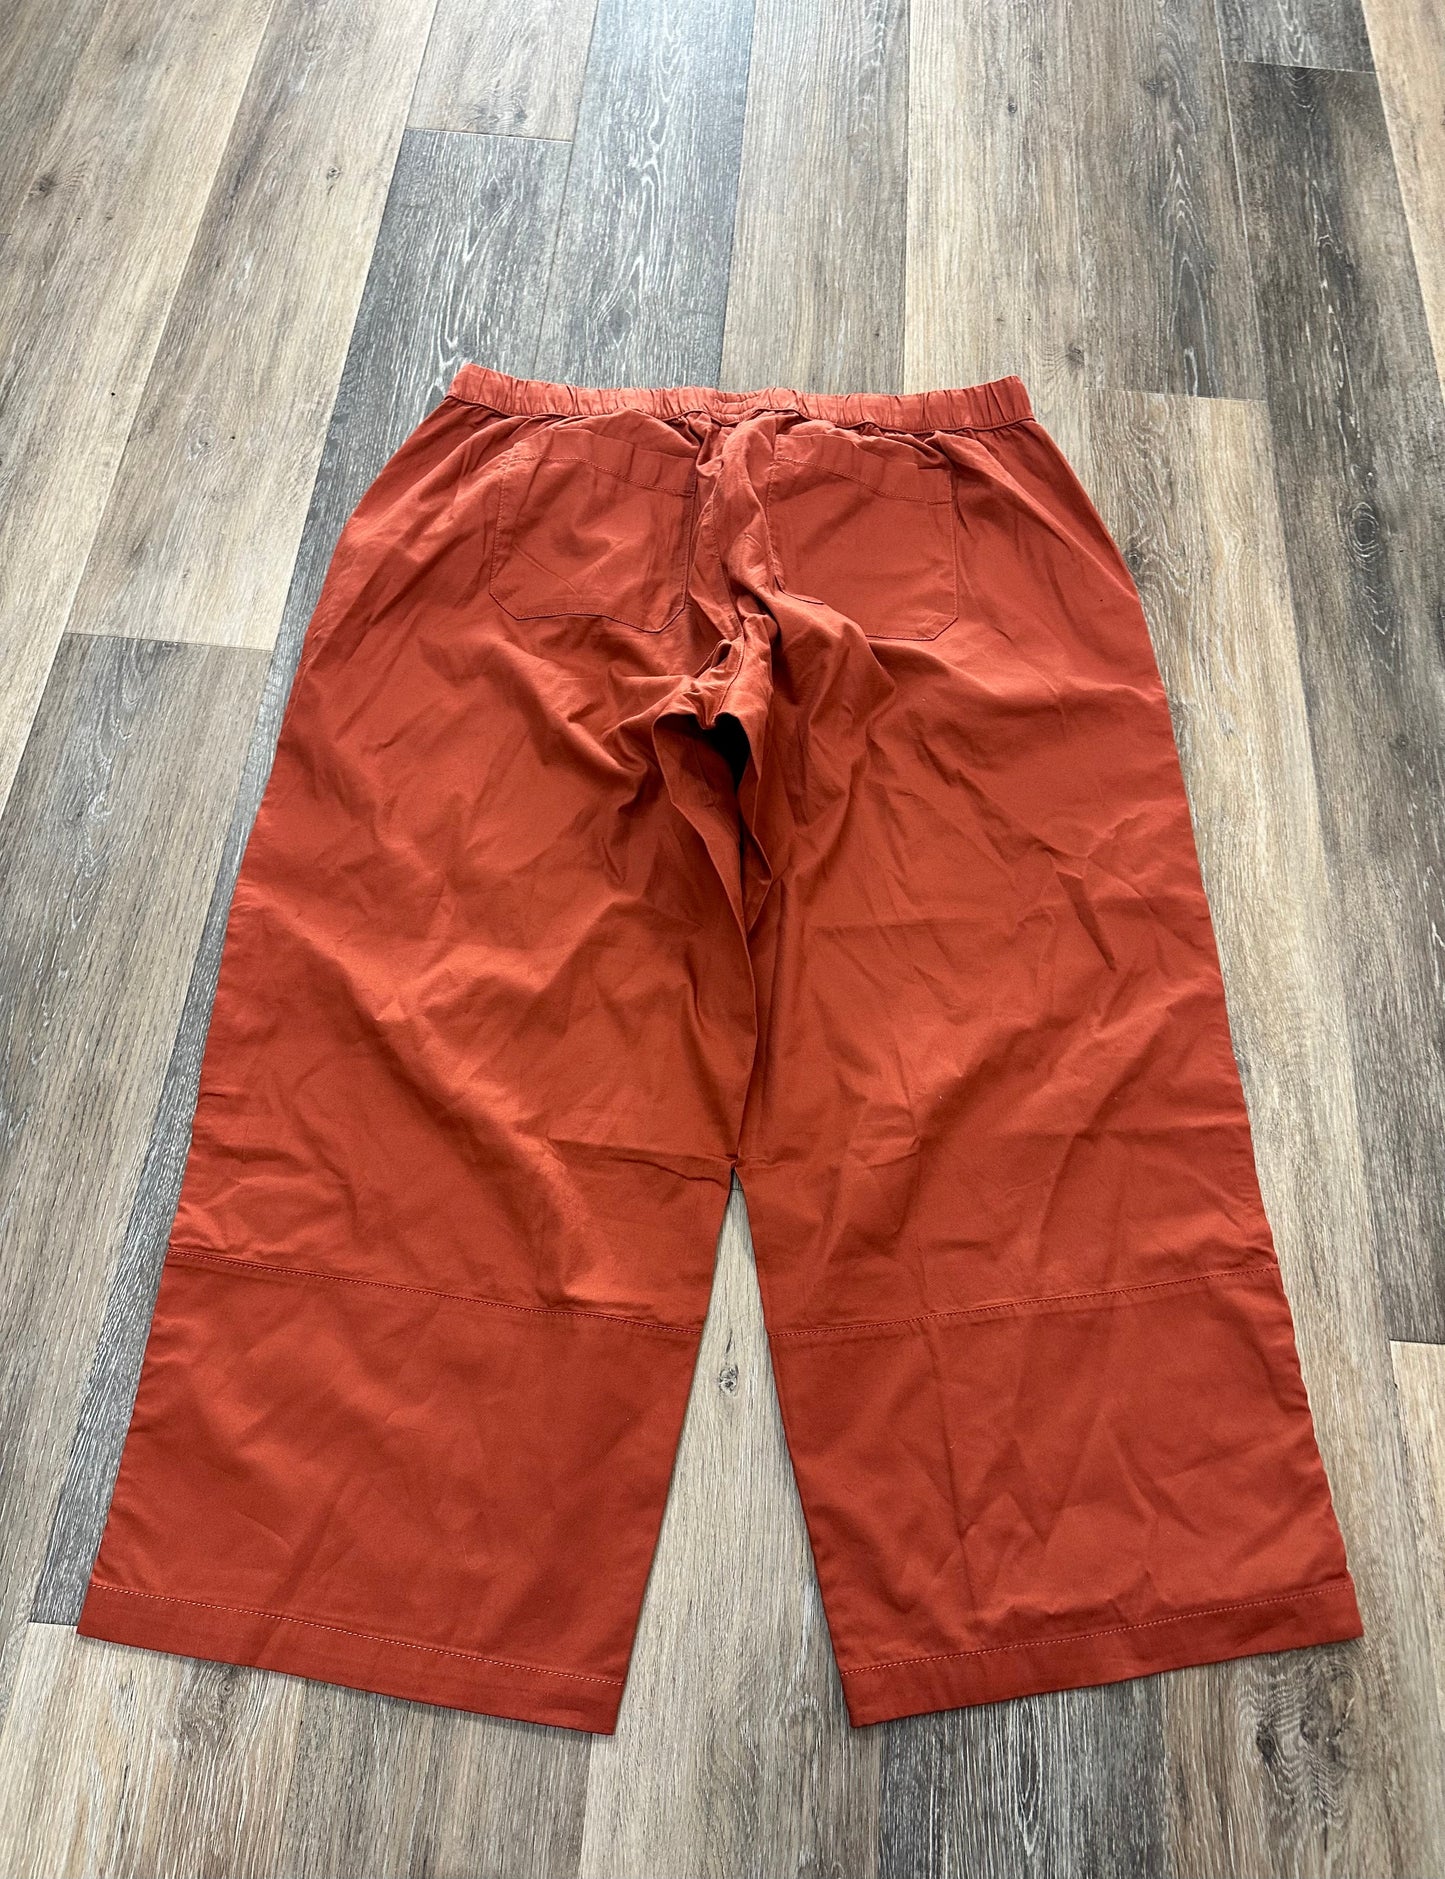 Pants Cargo & Utility By Pact  Size: Xxl